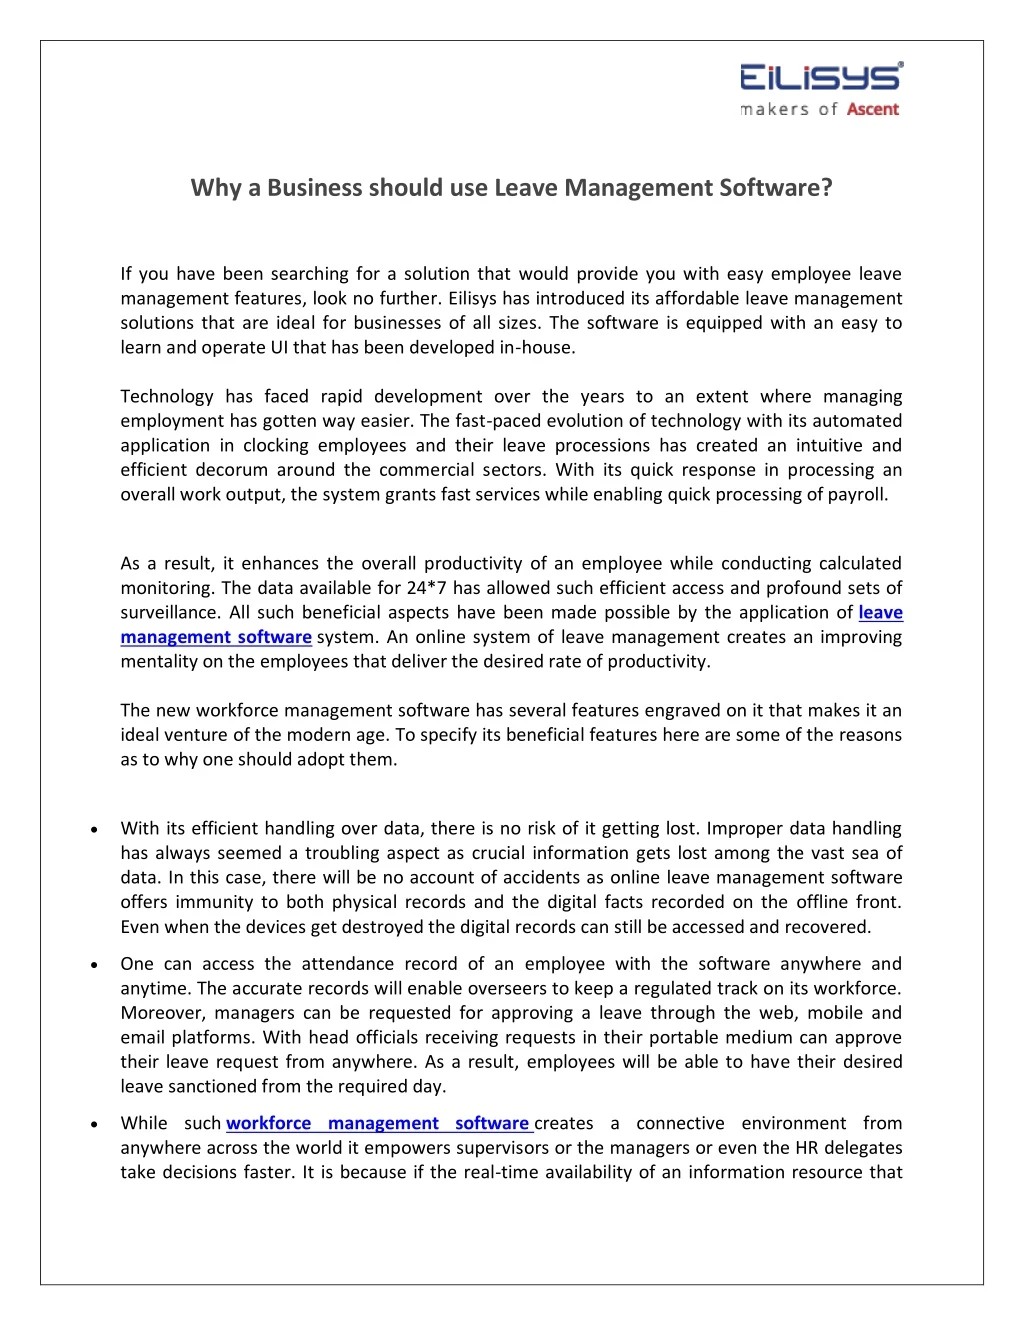 why a business should use leave management